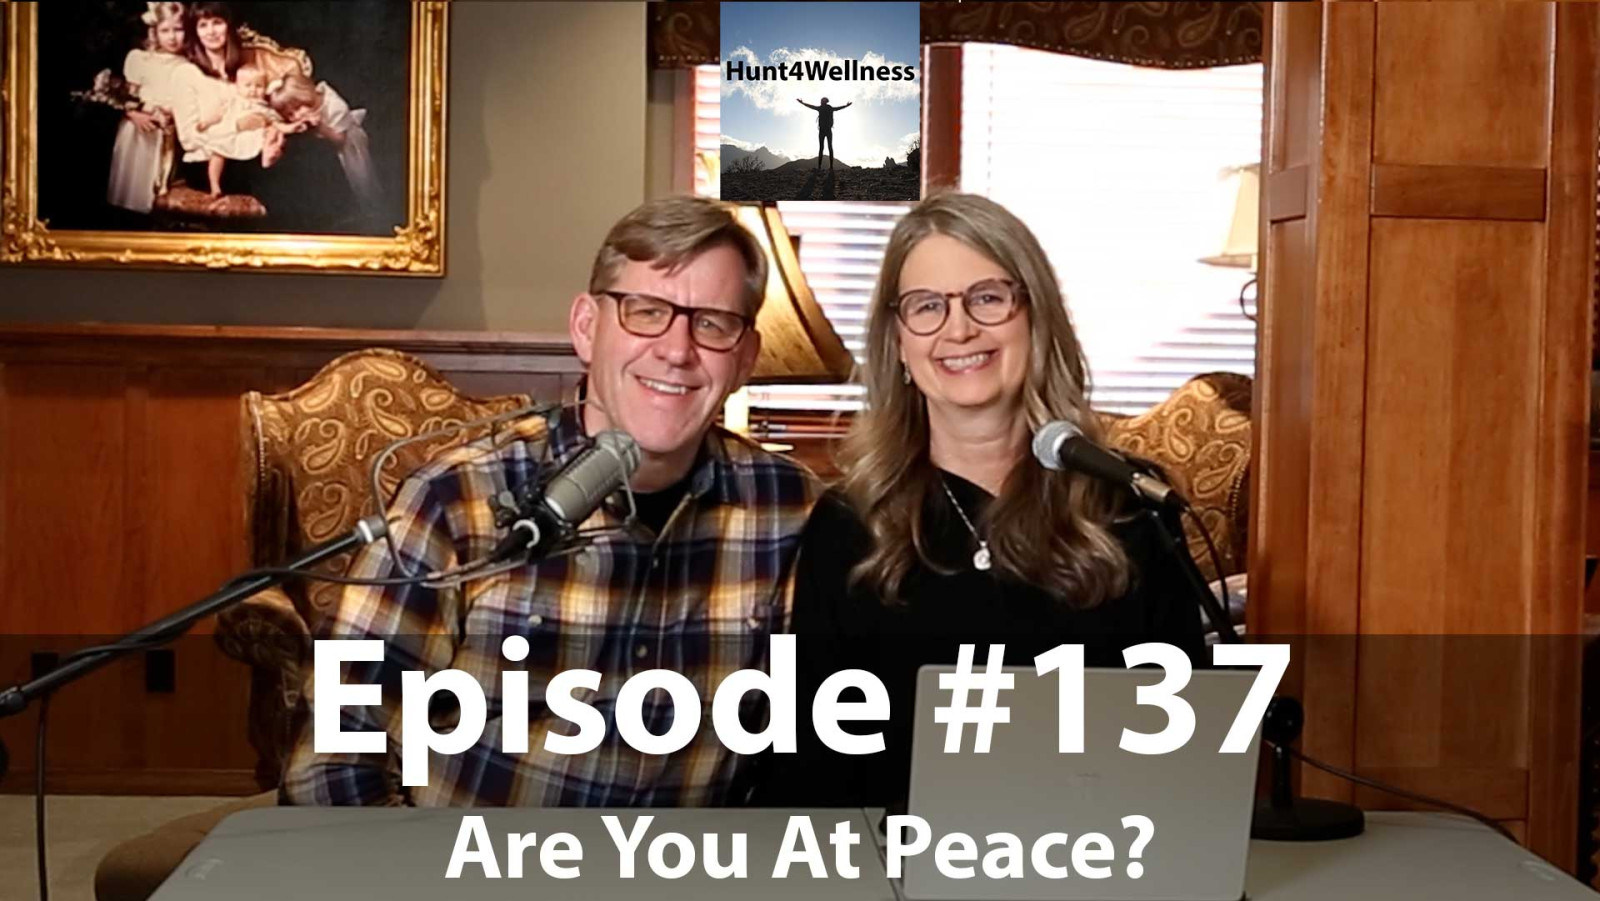 Episode #137 - Are You At Peace?